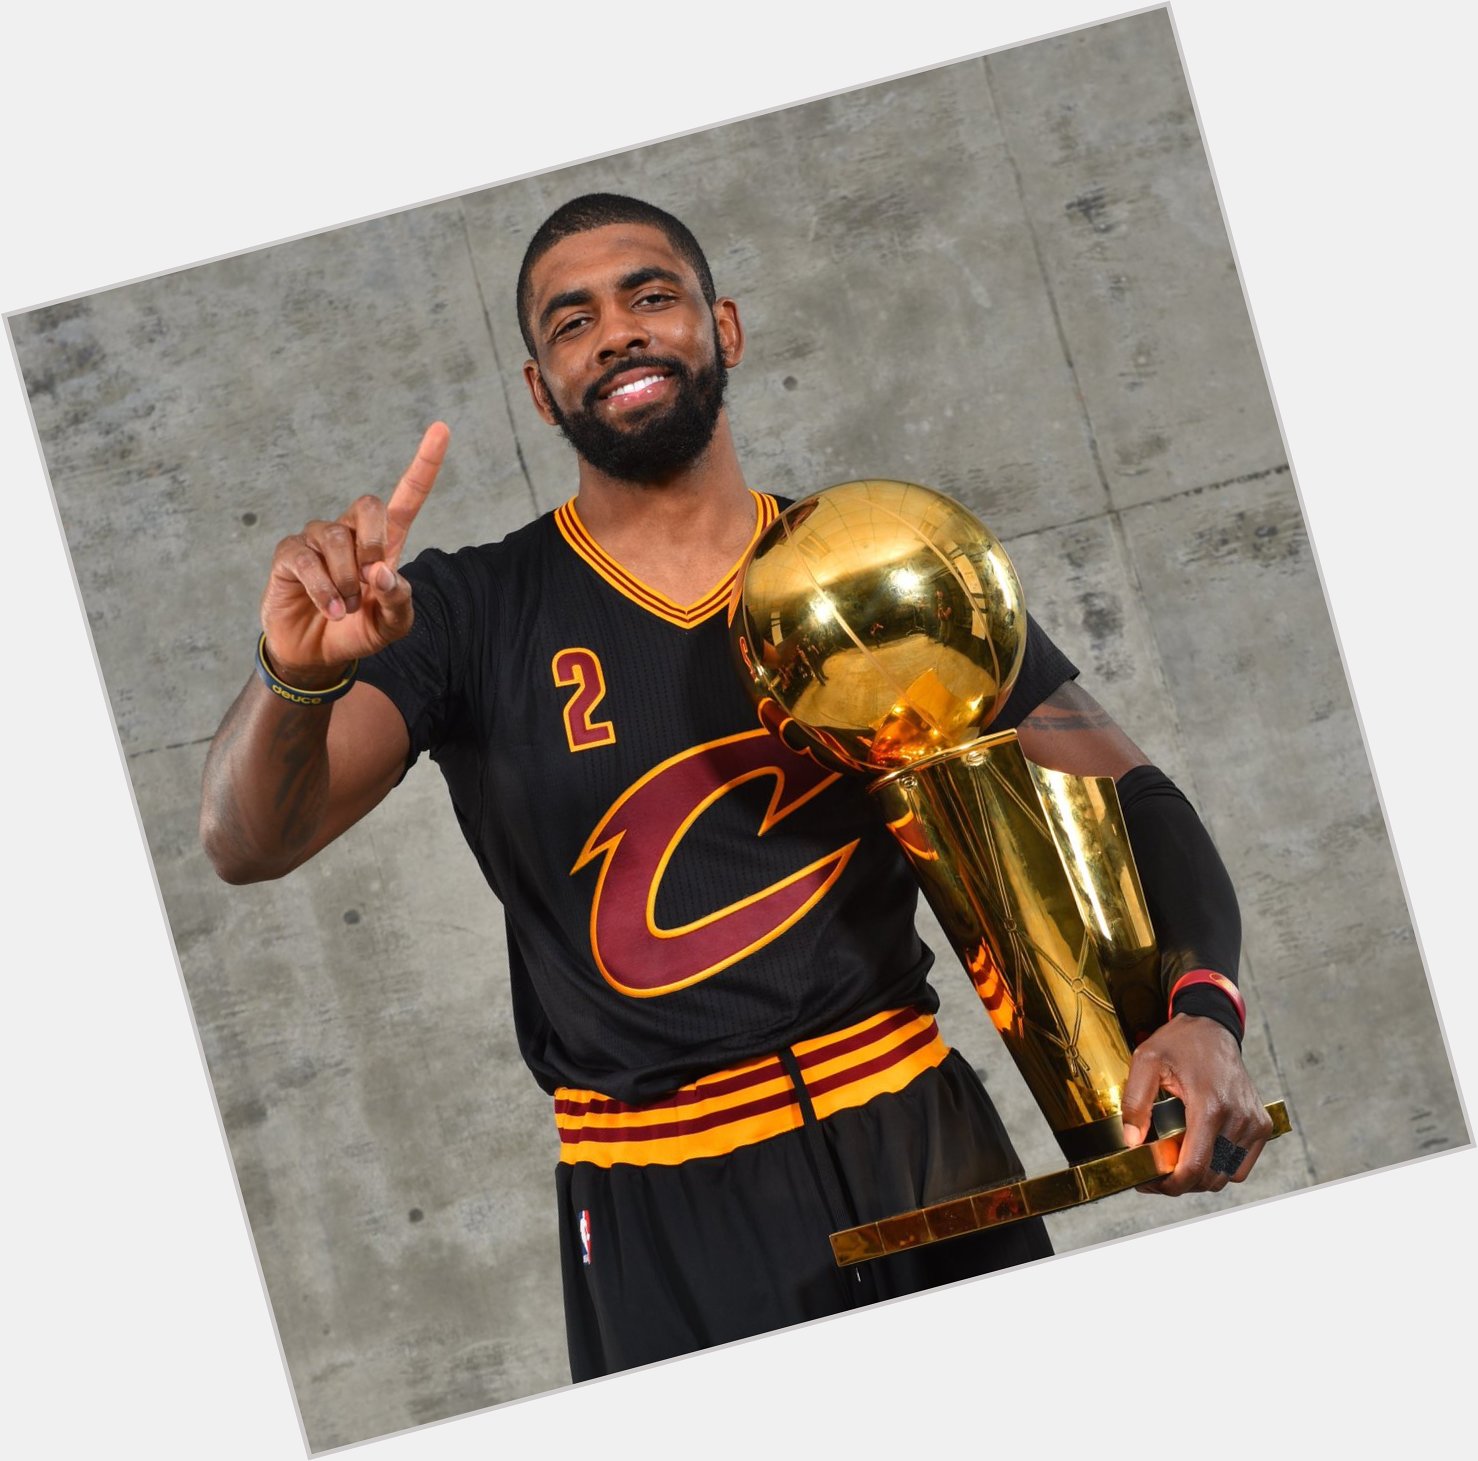 Happy Birthday to the 4-Time NBA All-Star, NBA Rookie of the Year, and 1-Time NBA Champion, Kyrie Irving!  